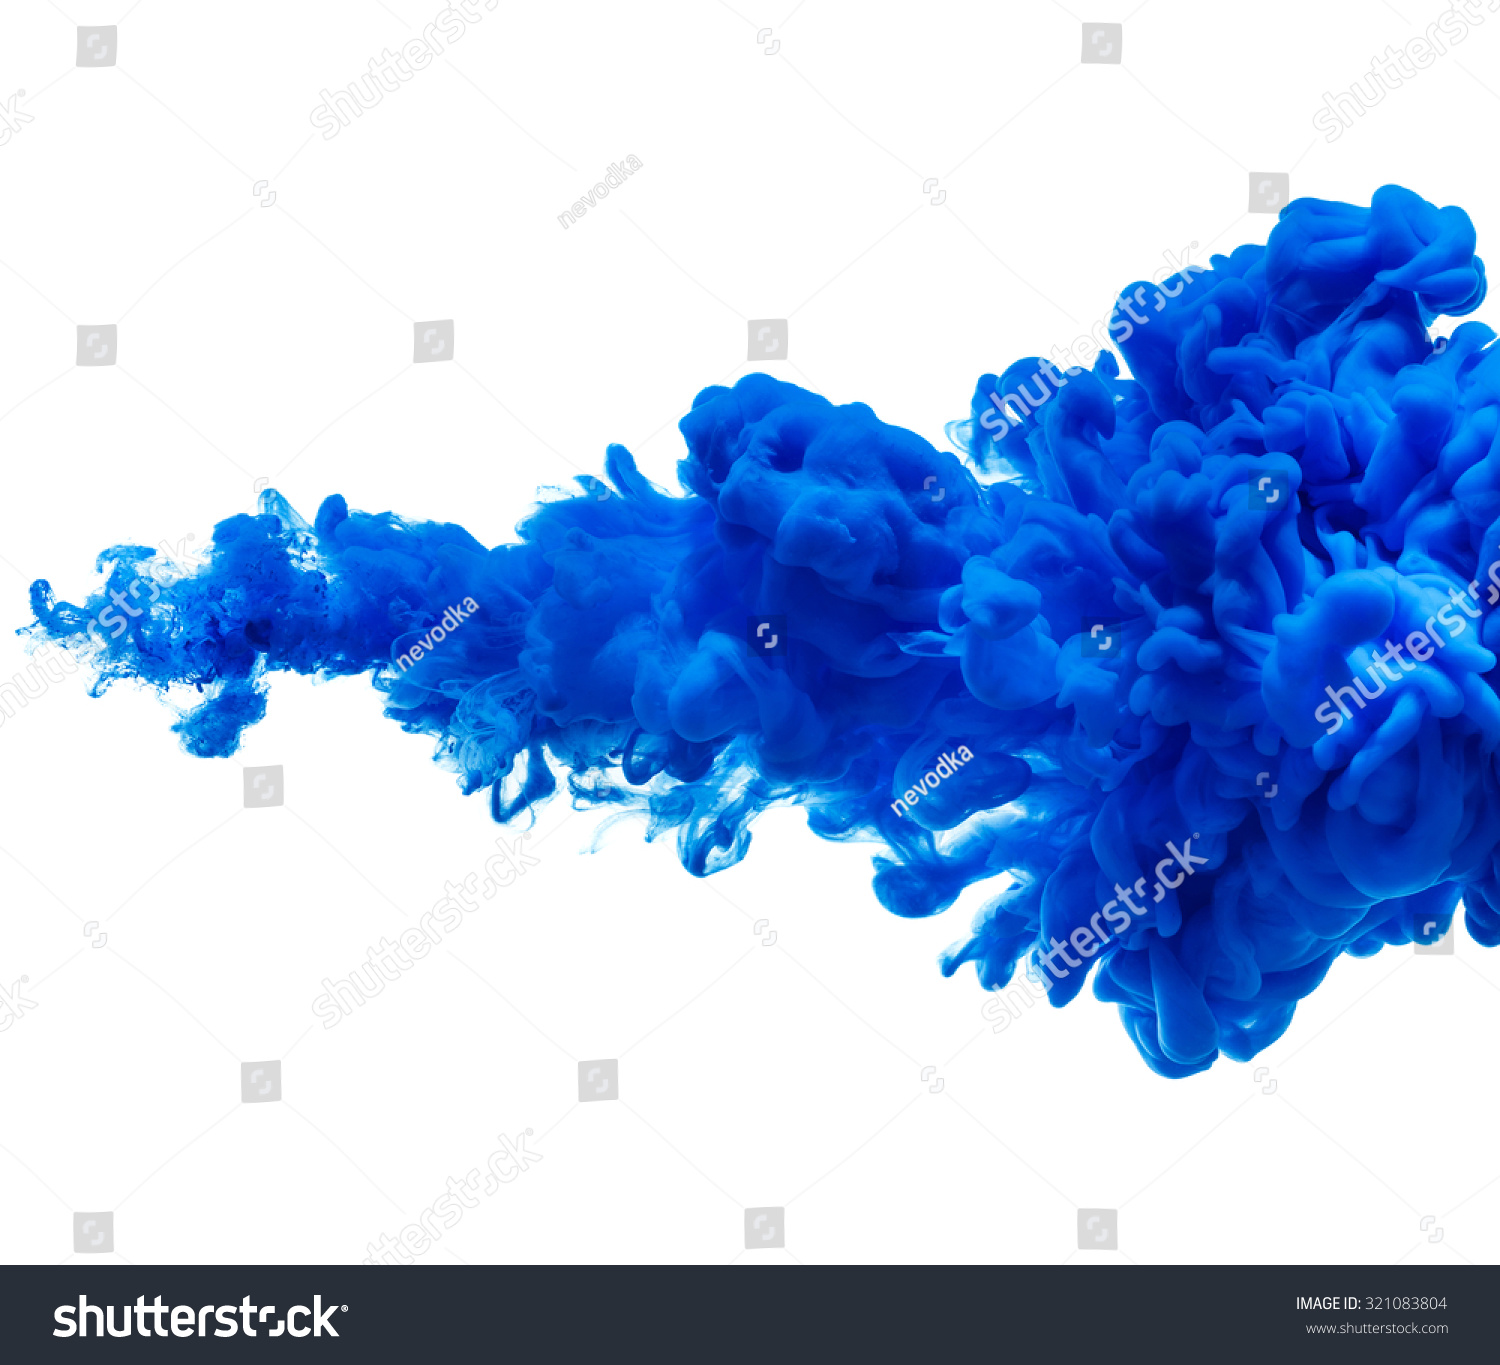 Ink Splash Cloud In Water Isolated On White Background Stock Photo ...